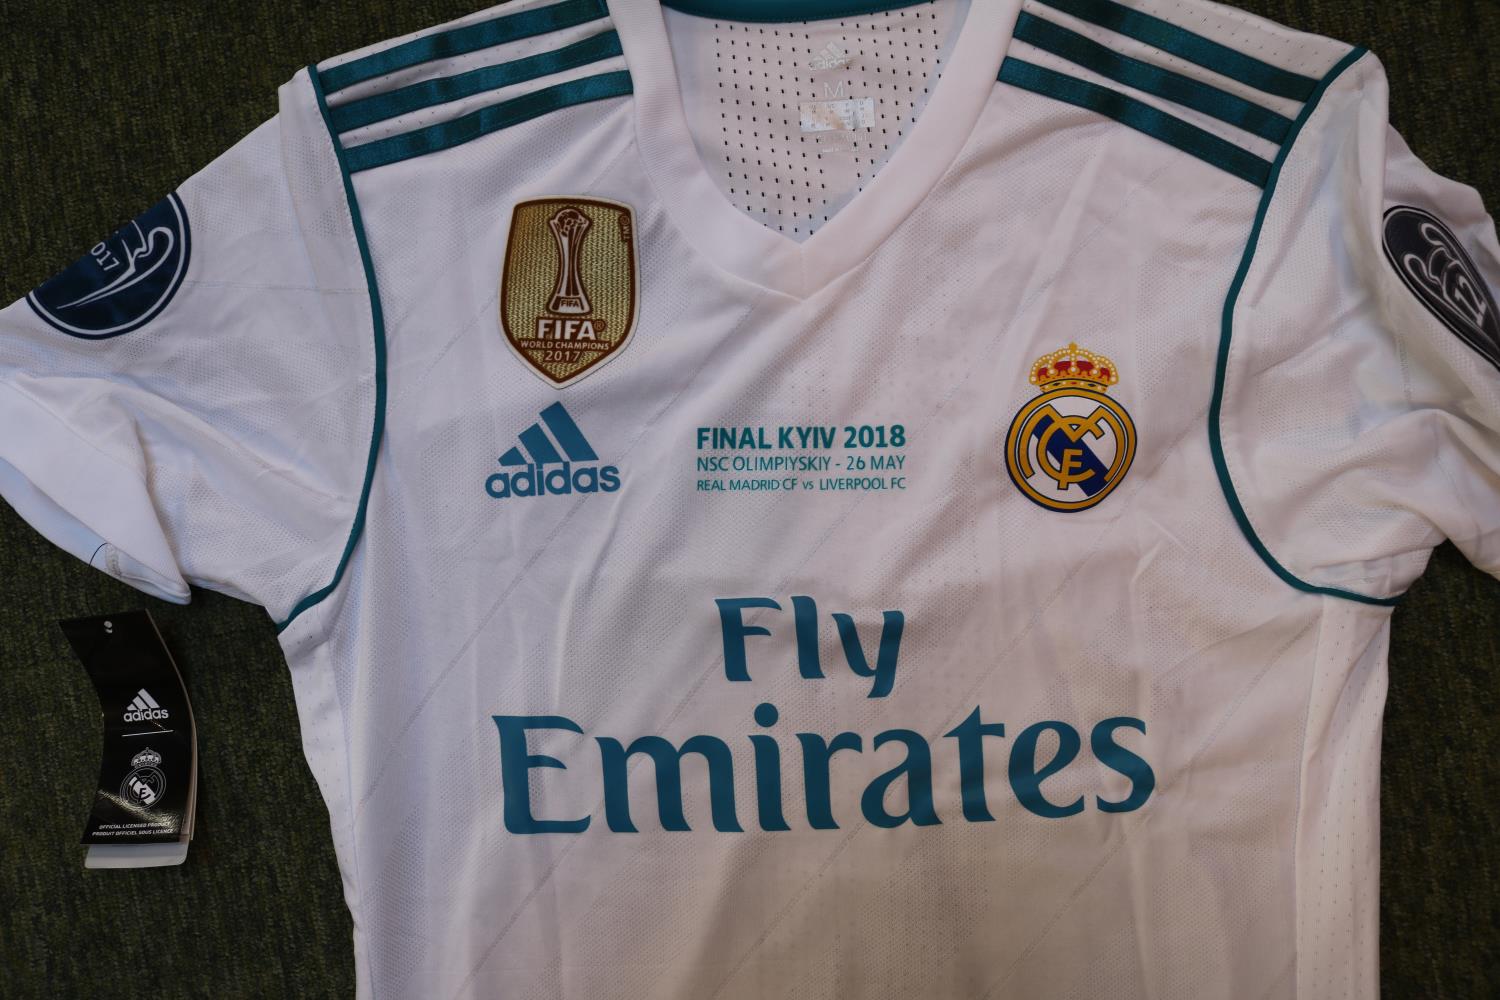 CRISTIANO RONALDO 2018 UEFA CHAMPIONS LEAGUE FINAL SIGNED REAL MADRID #7 JERSEY The jersey is - Image 2 of 5